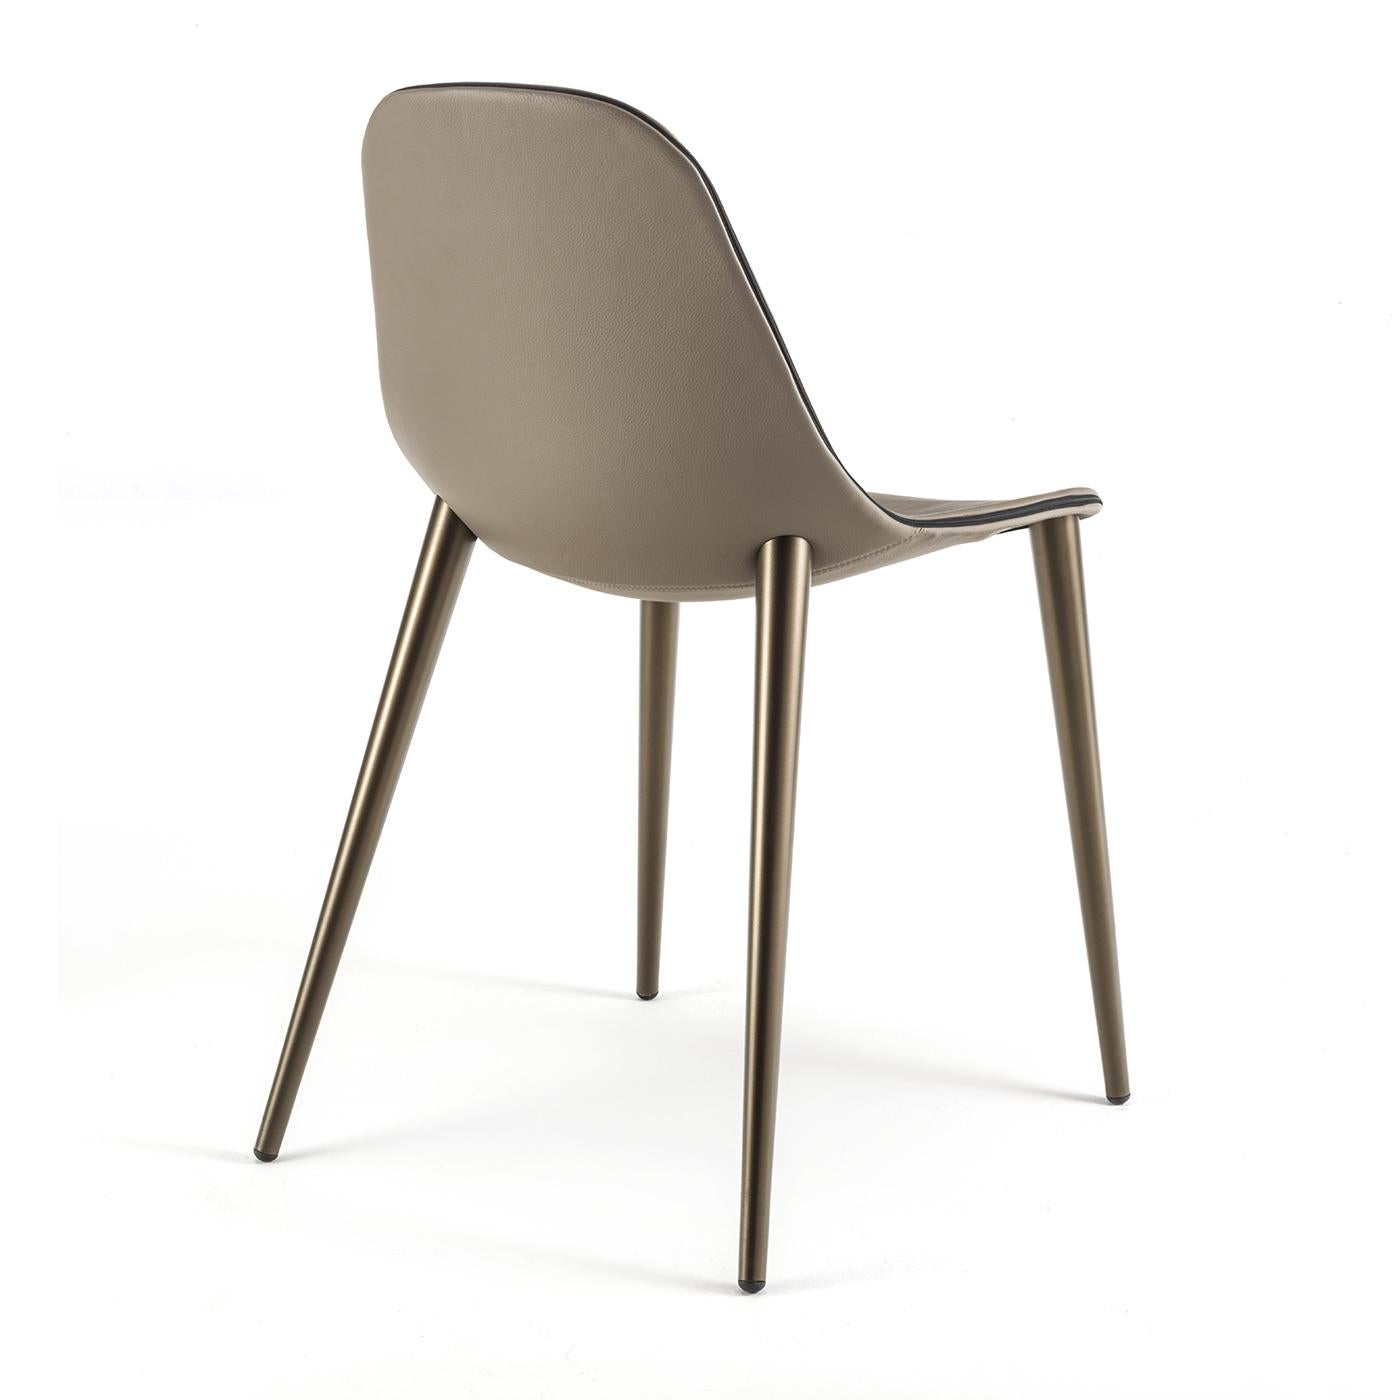 Designed to meet the needs of the most-demanding client, the Couture collection fits into any indoor environment. Its high-quality, durable materials make it perfect for residential, business or hospitality use. The chair's leather-covered seat